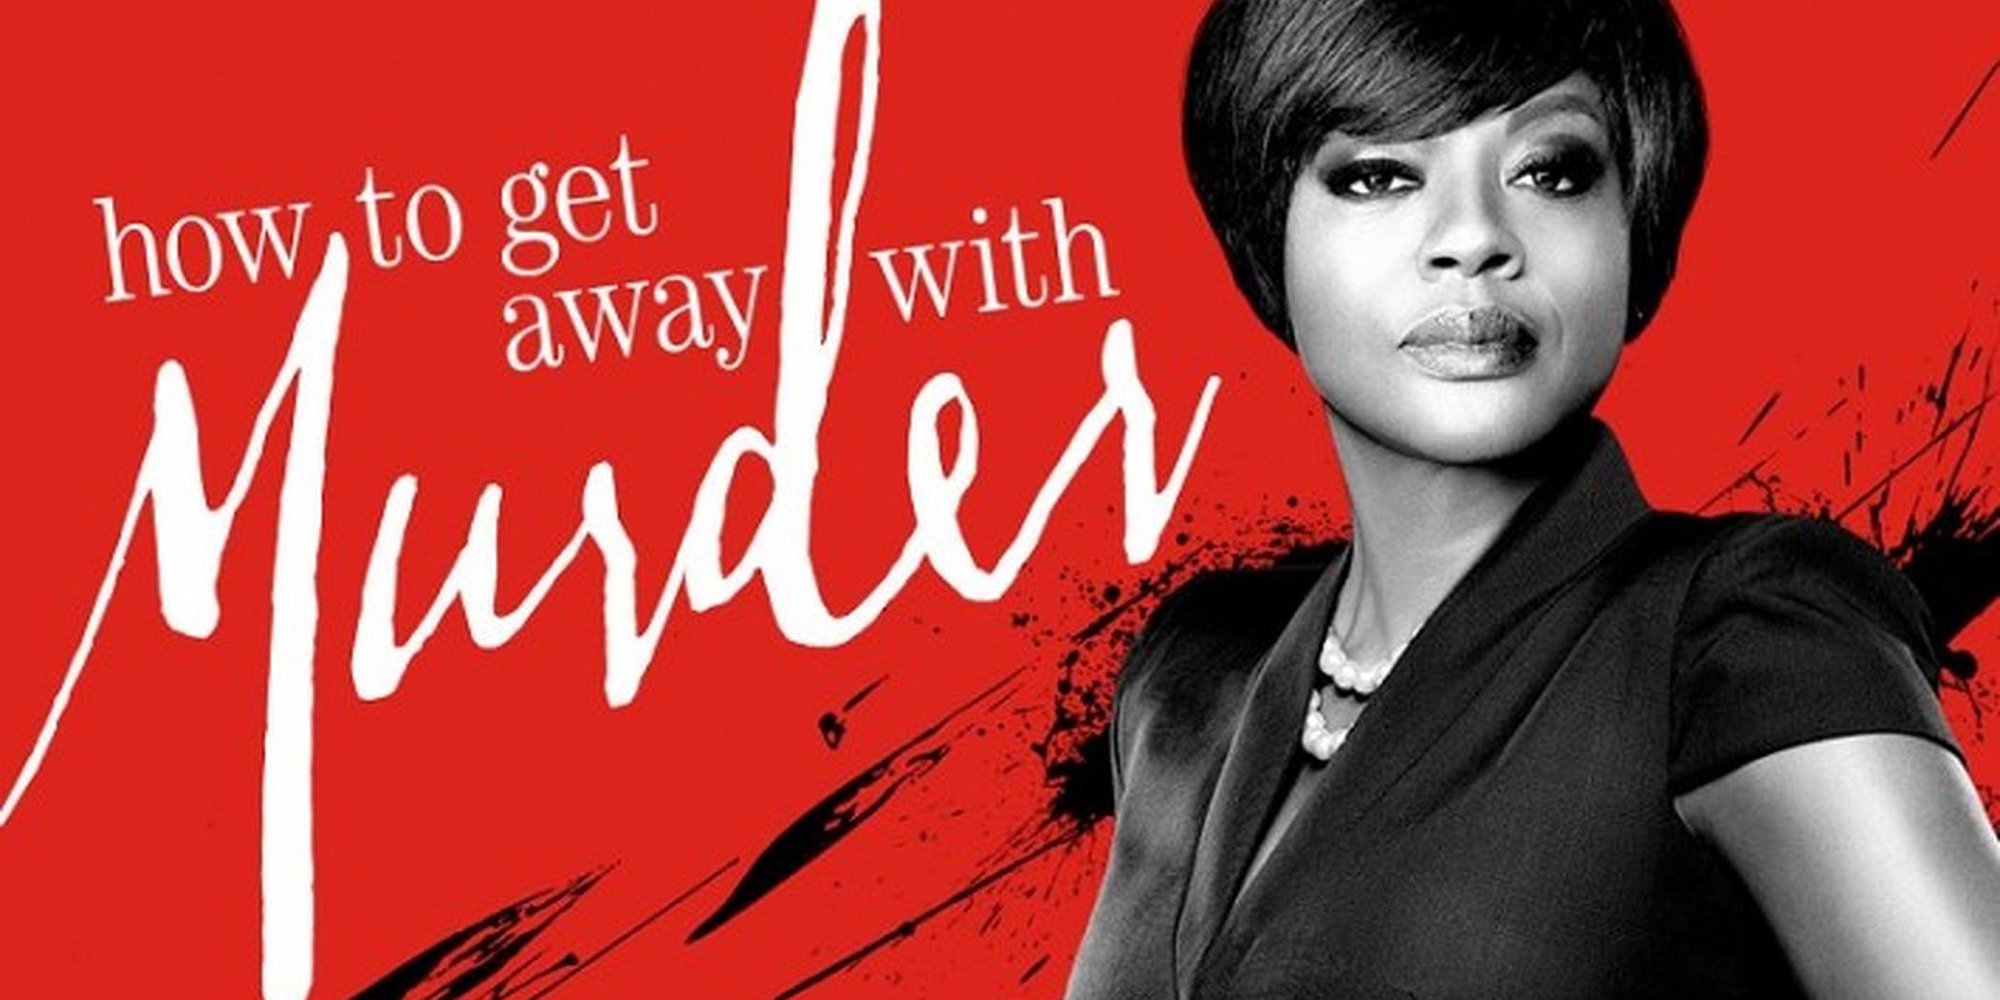 HOW TO GET AWAY WITH MURDER